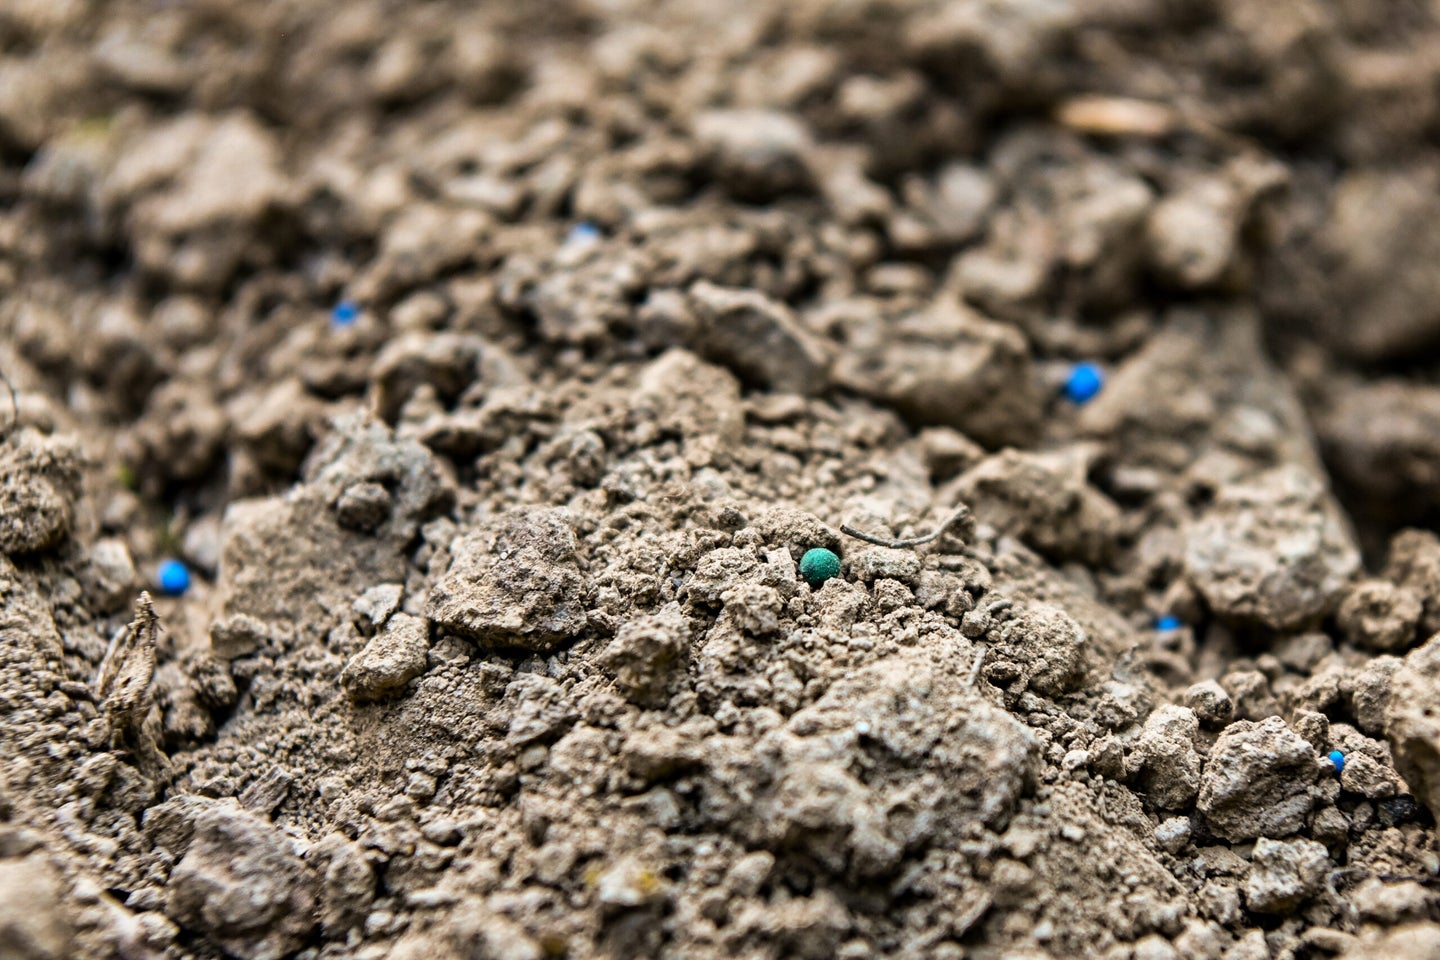 Seeds in the dirt.